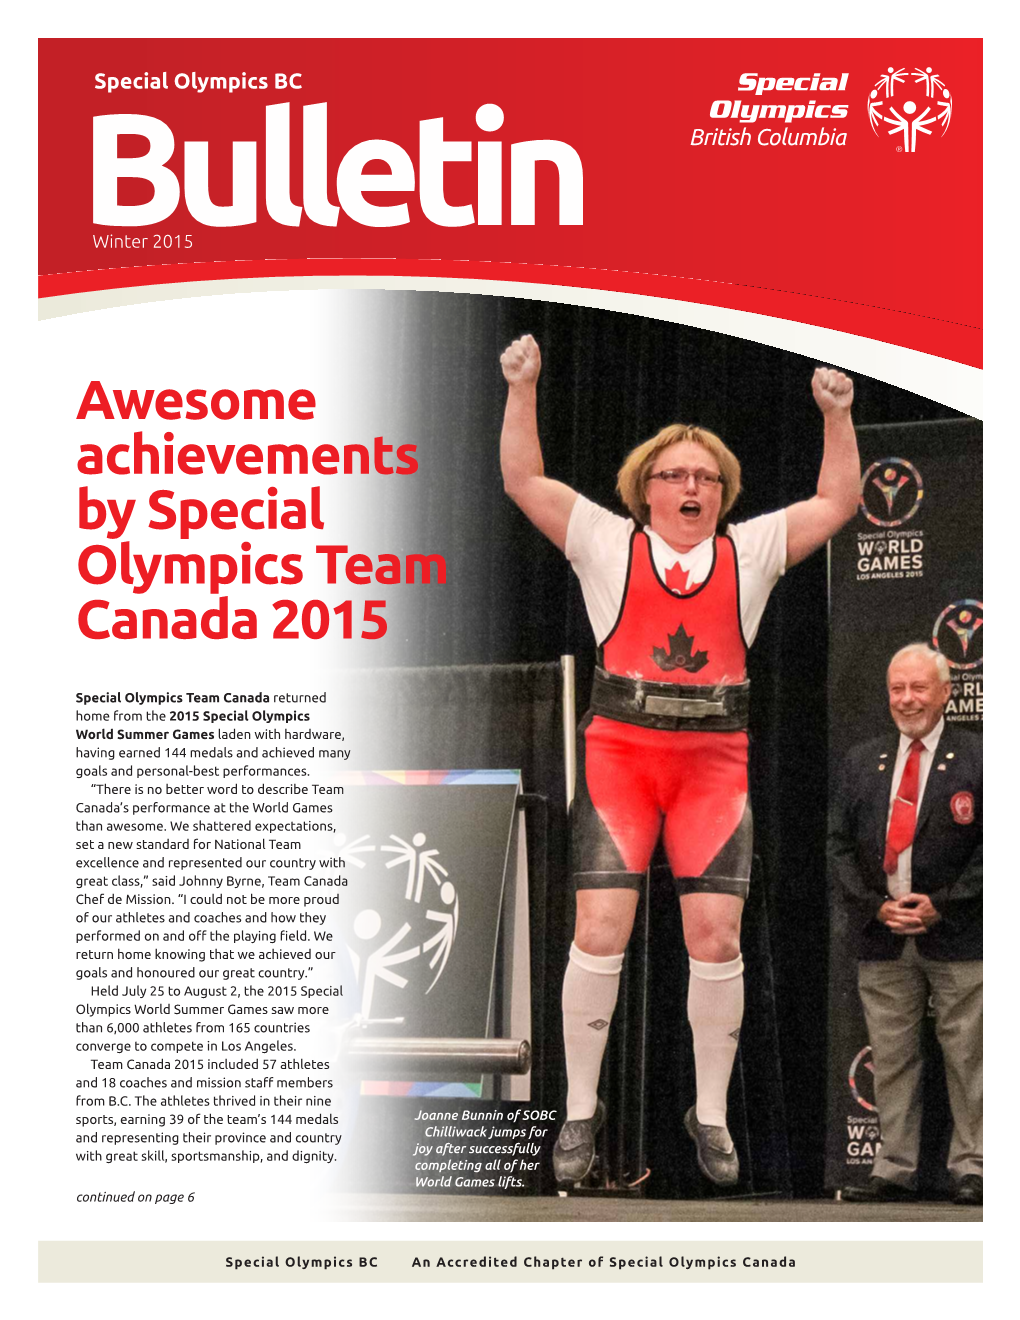 Awesome Achievements by Special Olympics Team Canada 2015